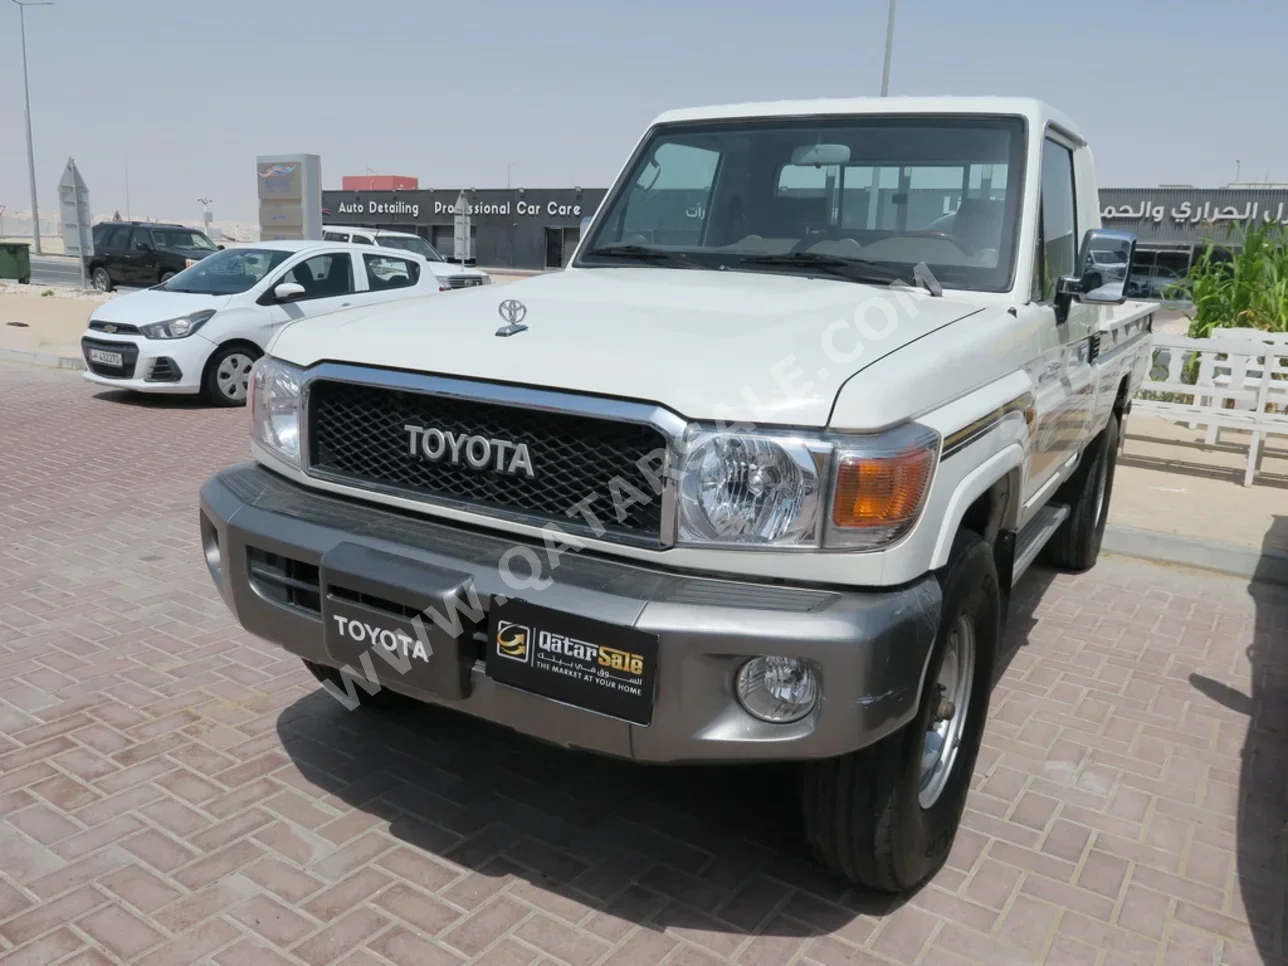  Toyota  Land Cruiser  LX  2021  Manual  156,000 Km  6 Cylinder  Four Wheel Drive (4WD)  Pick Up  White  With Warranty